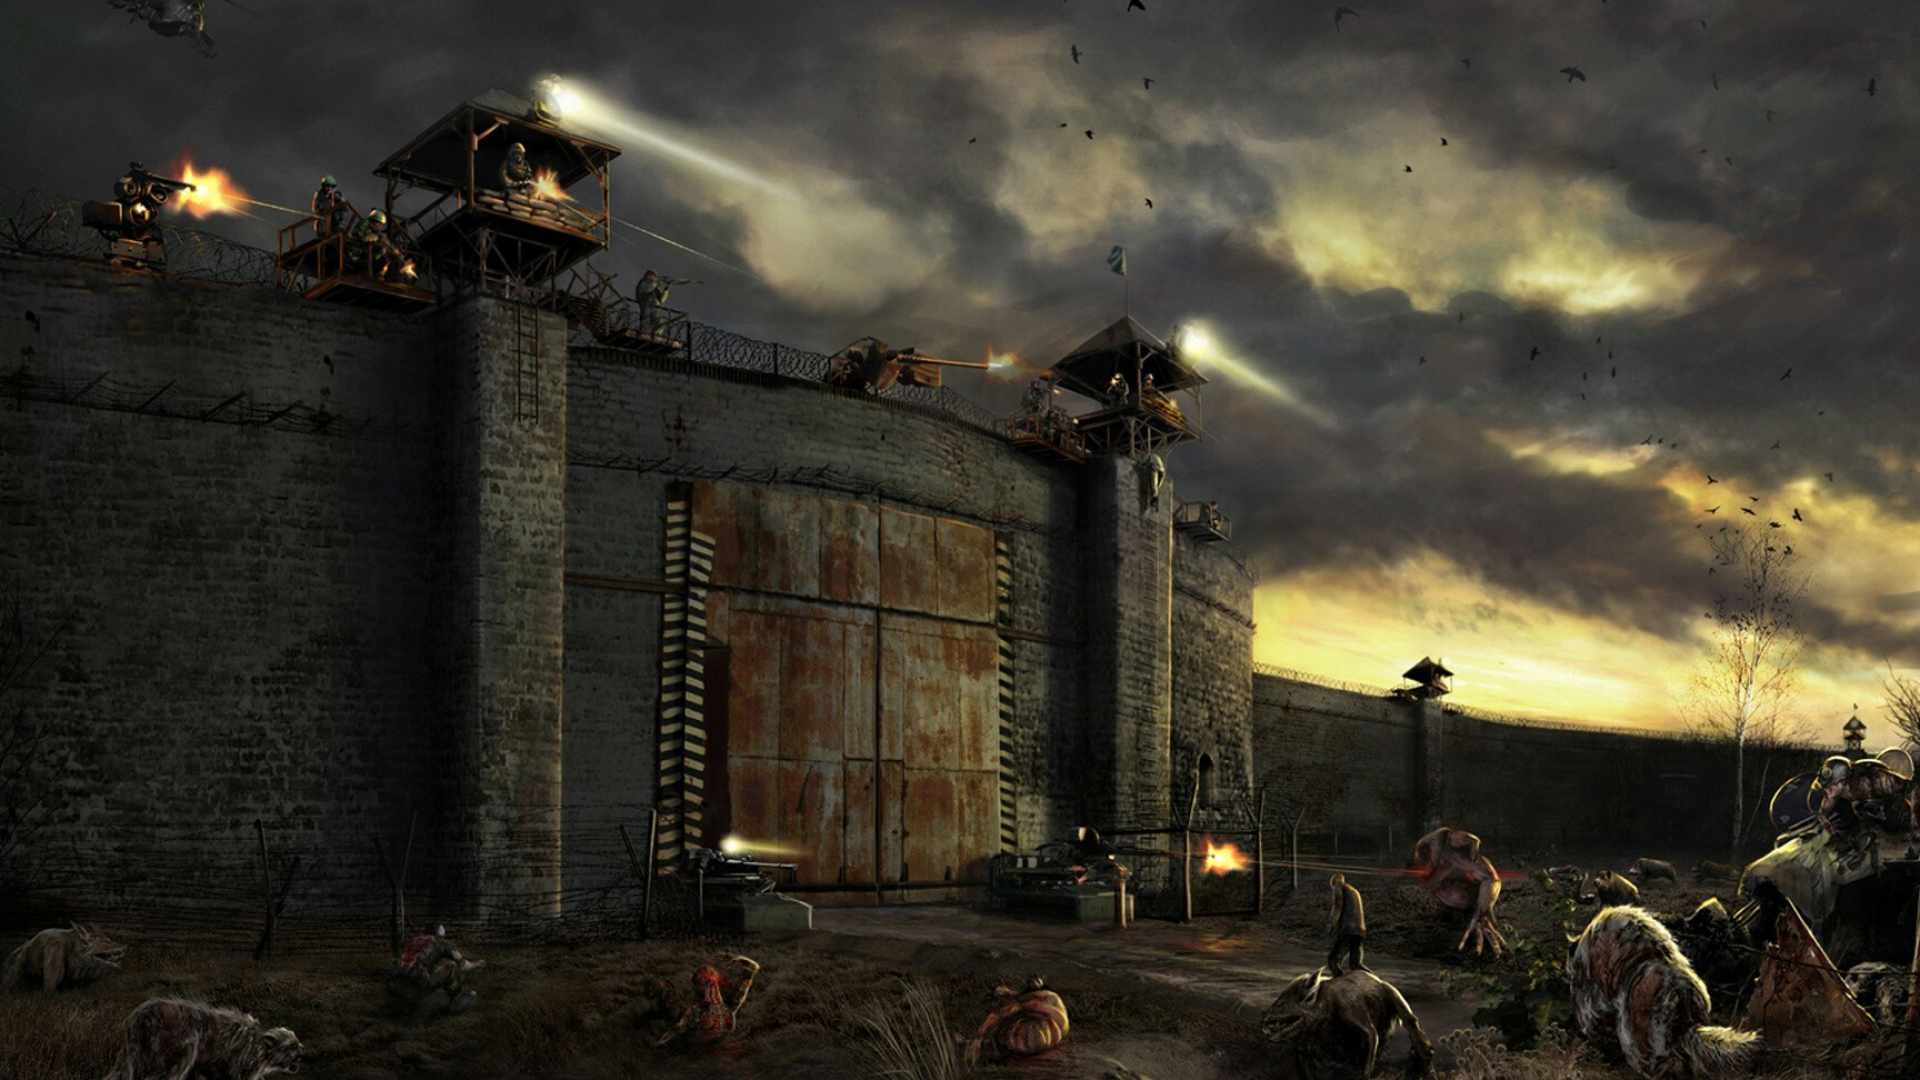 Post-apocalypse: The collapse of society, Zombies. 1920x1080 Full HD Wallpaper.